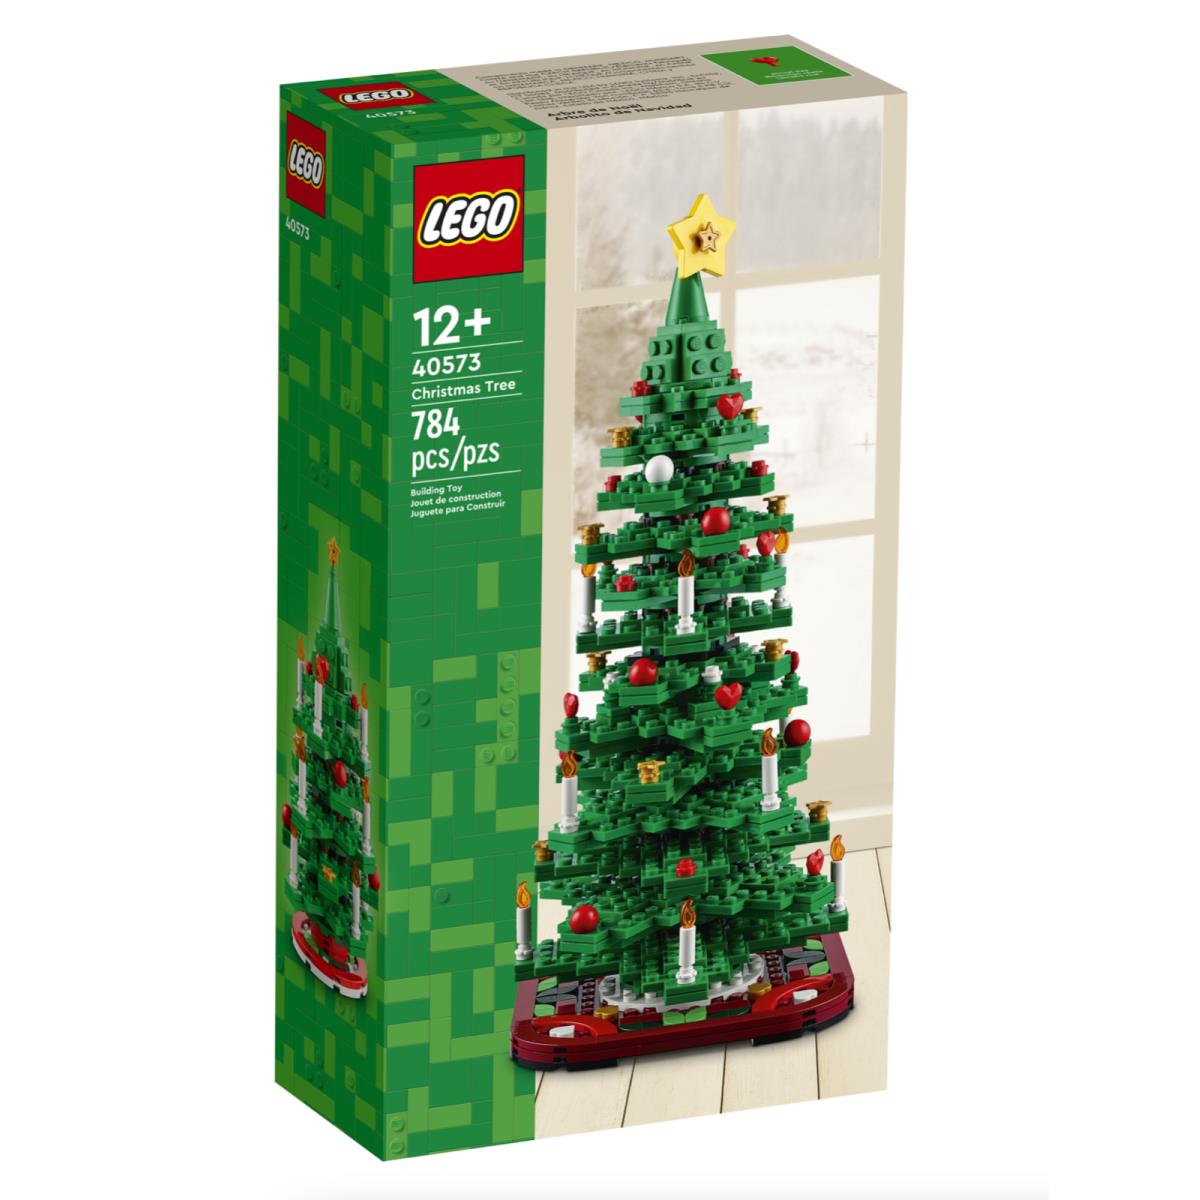 Lego 2 IN 1 Christmas Tree 40573 Gift -immediate Shipping